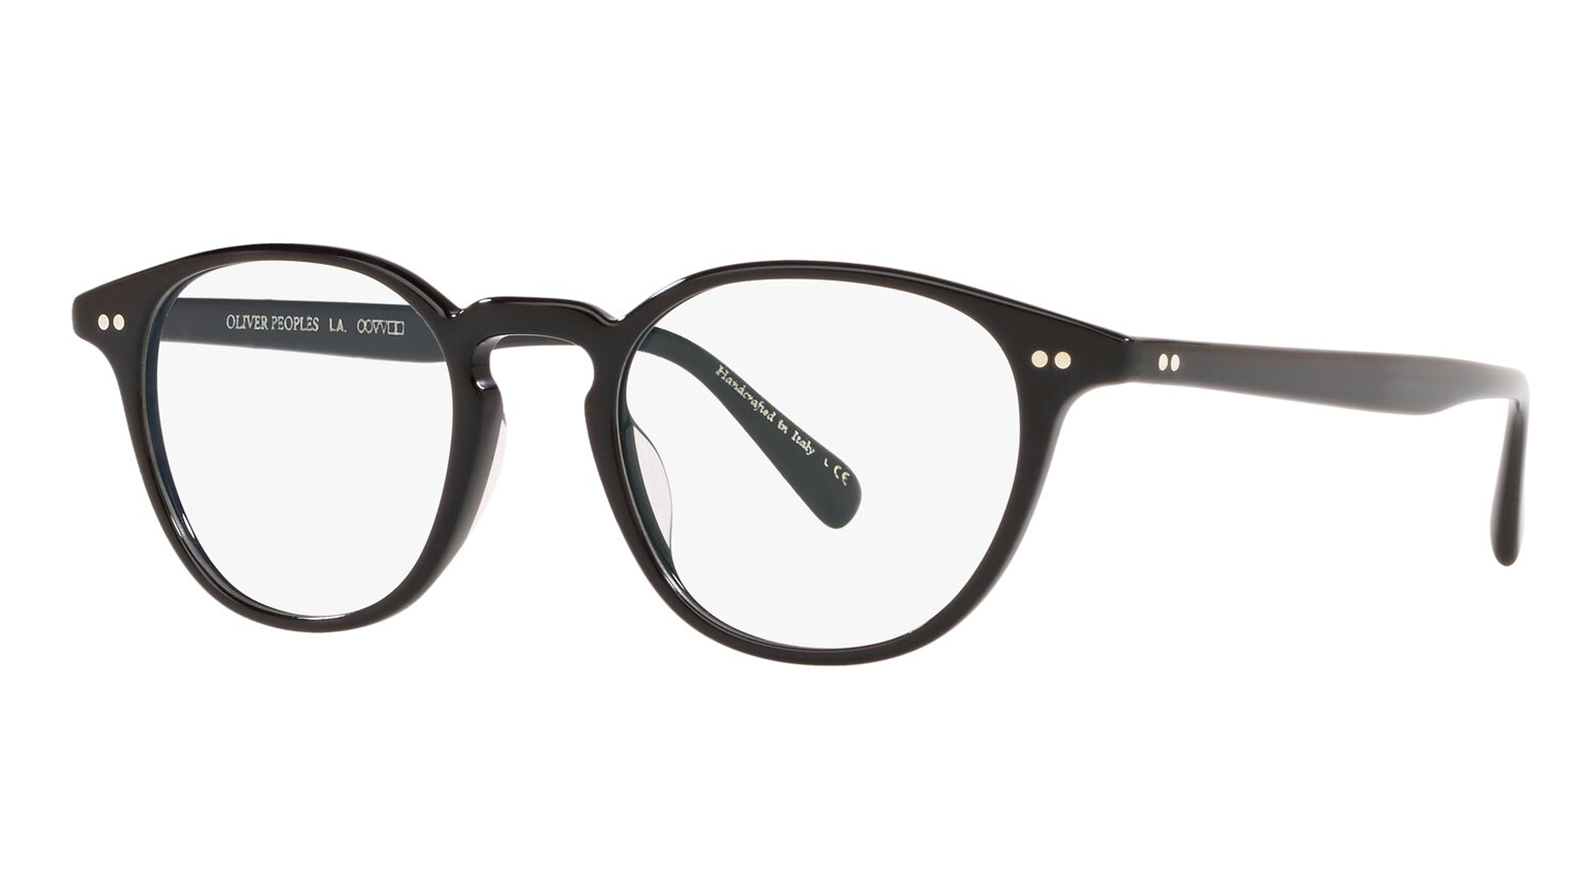 Oliver Peoples 5062 1005 edu 1005 chiva match subtract